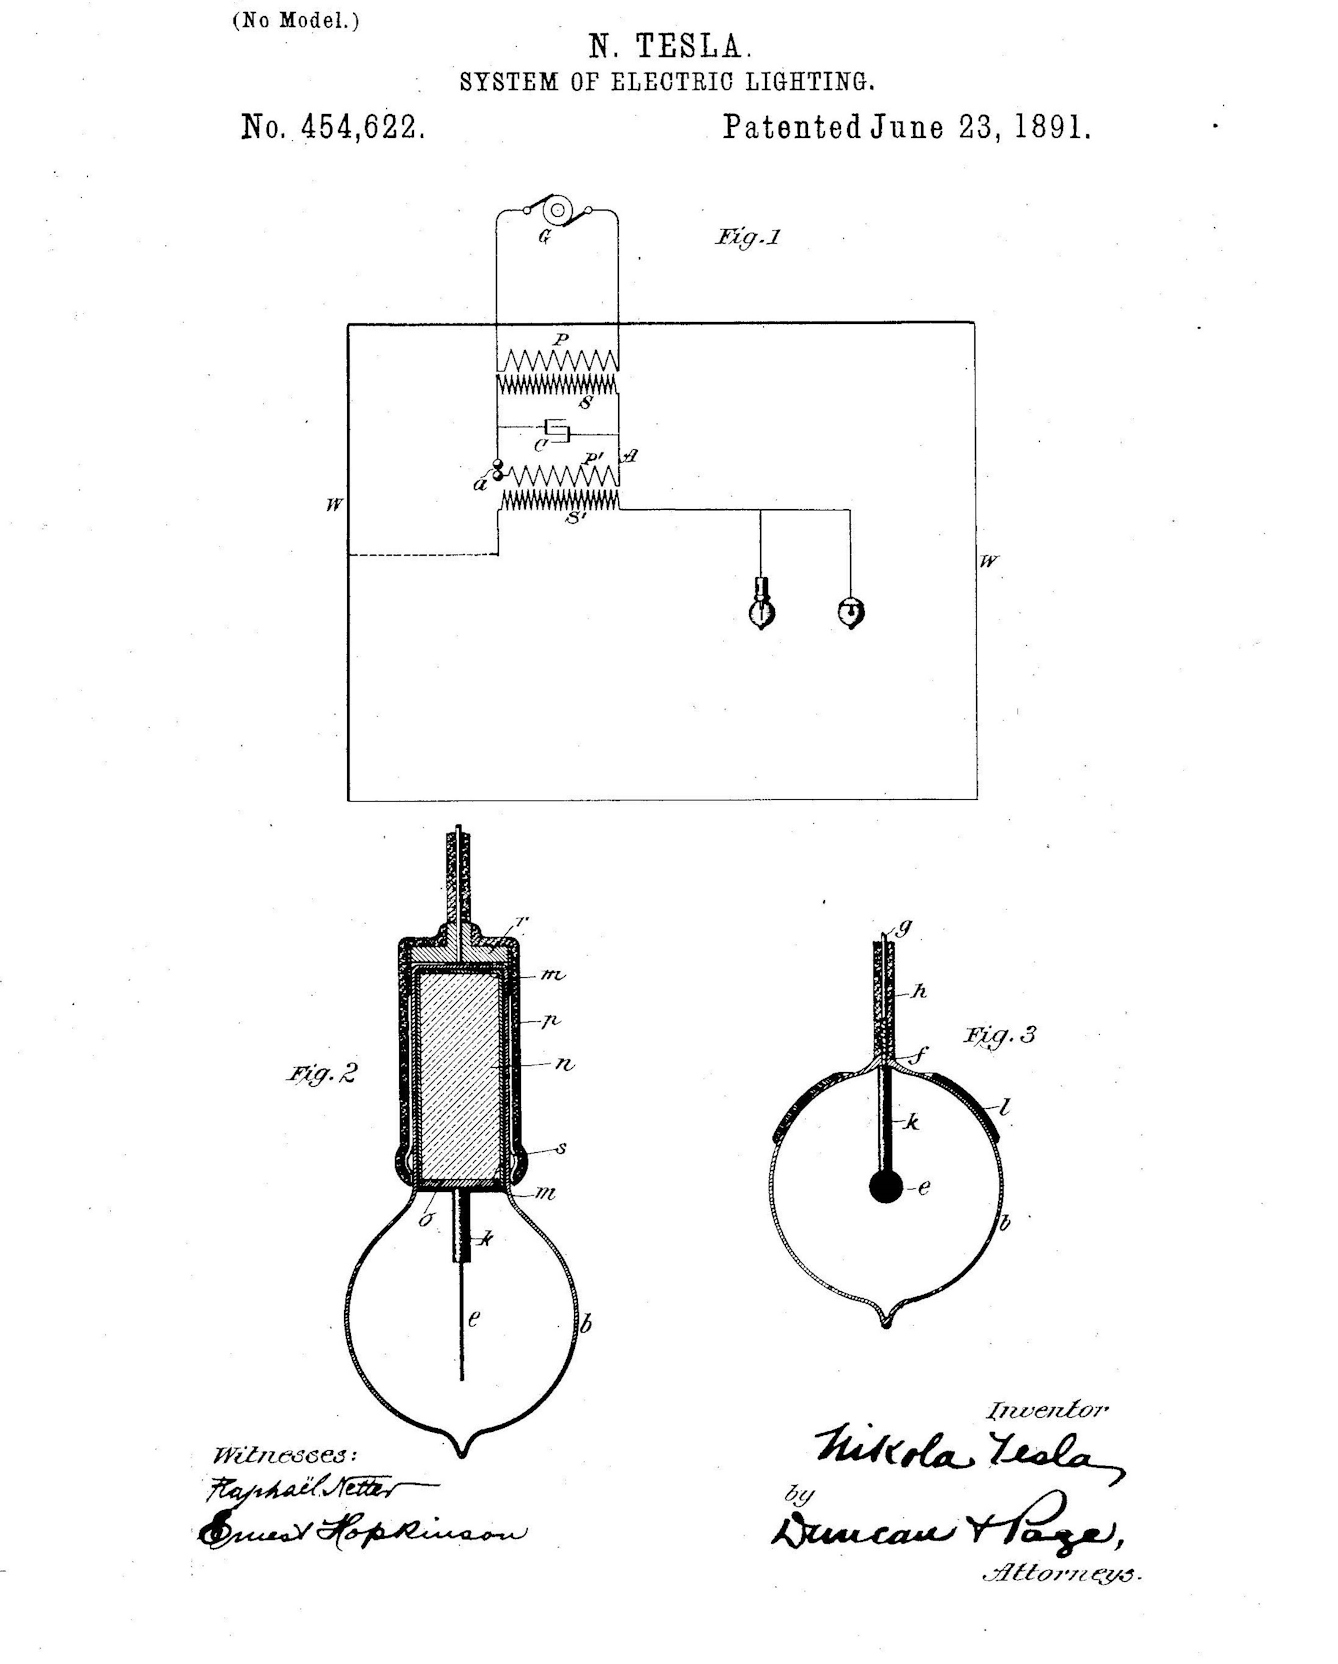 Black and white drawing of an electrical circuit with a light bulb, labelled N. Tesla System of Electric Lighting and signed by Tesla under the word inventor.